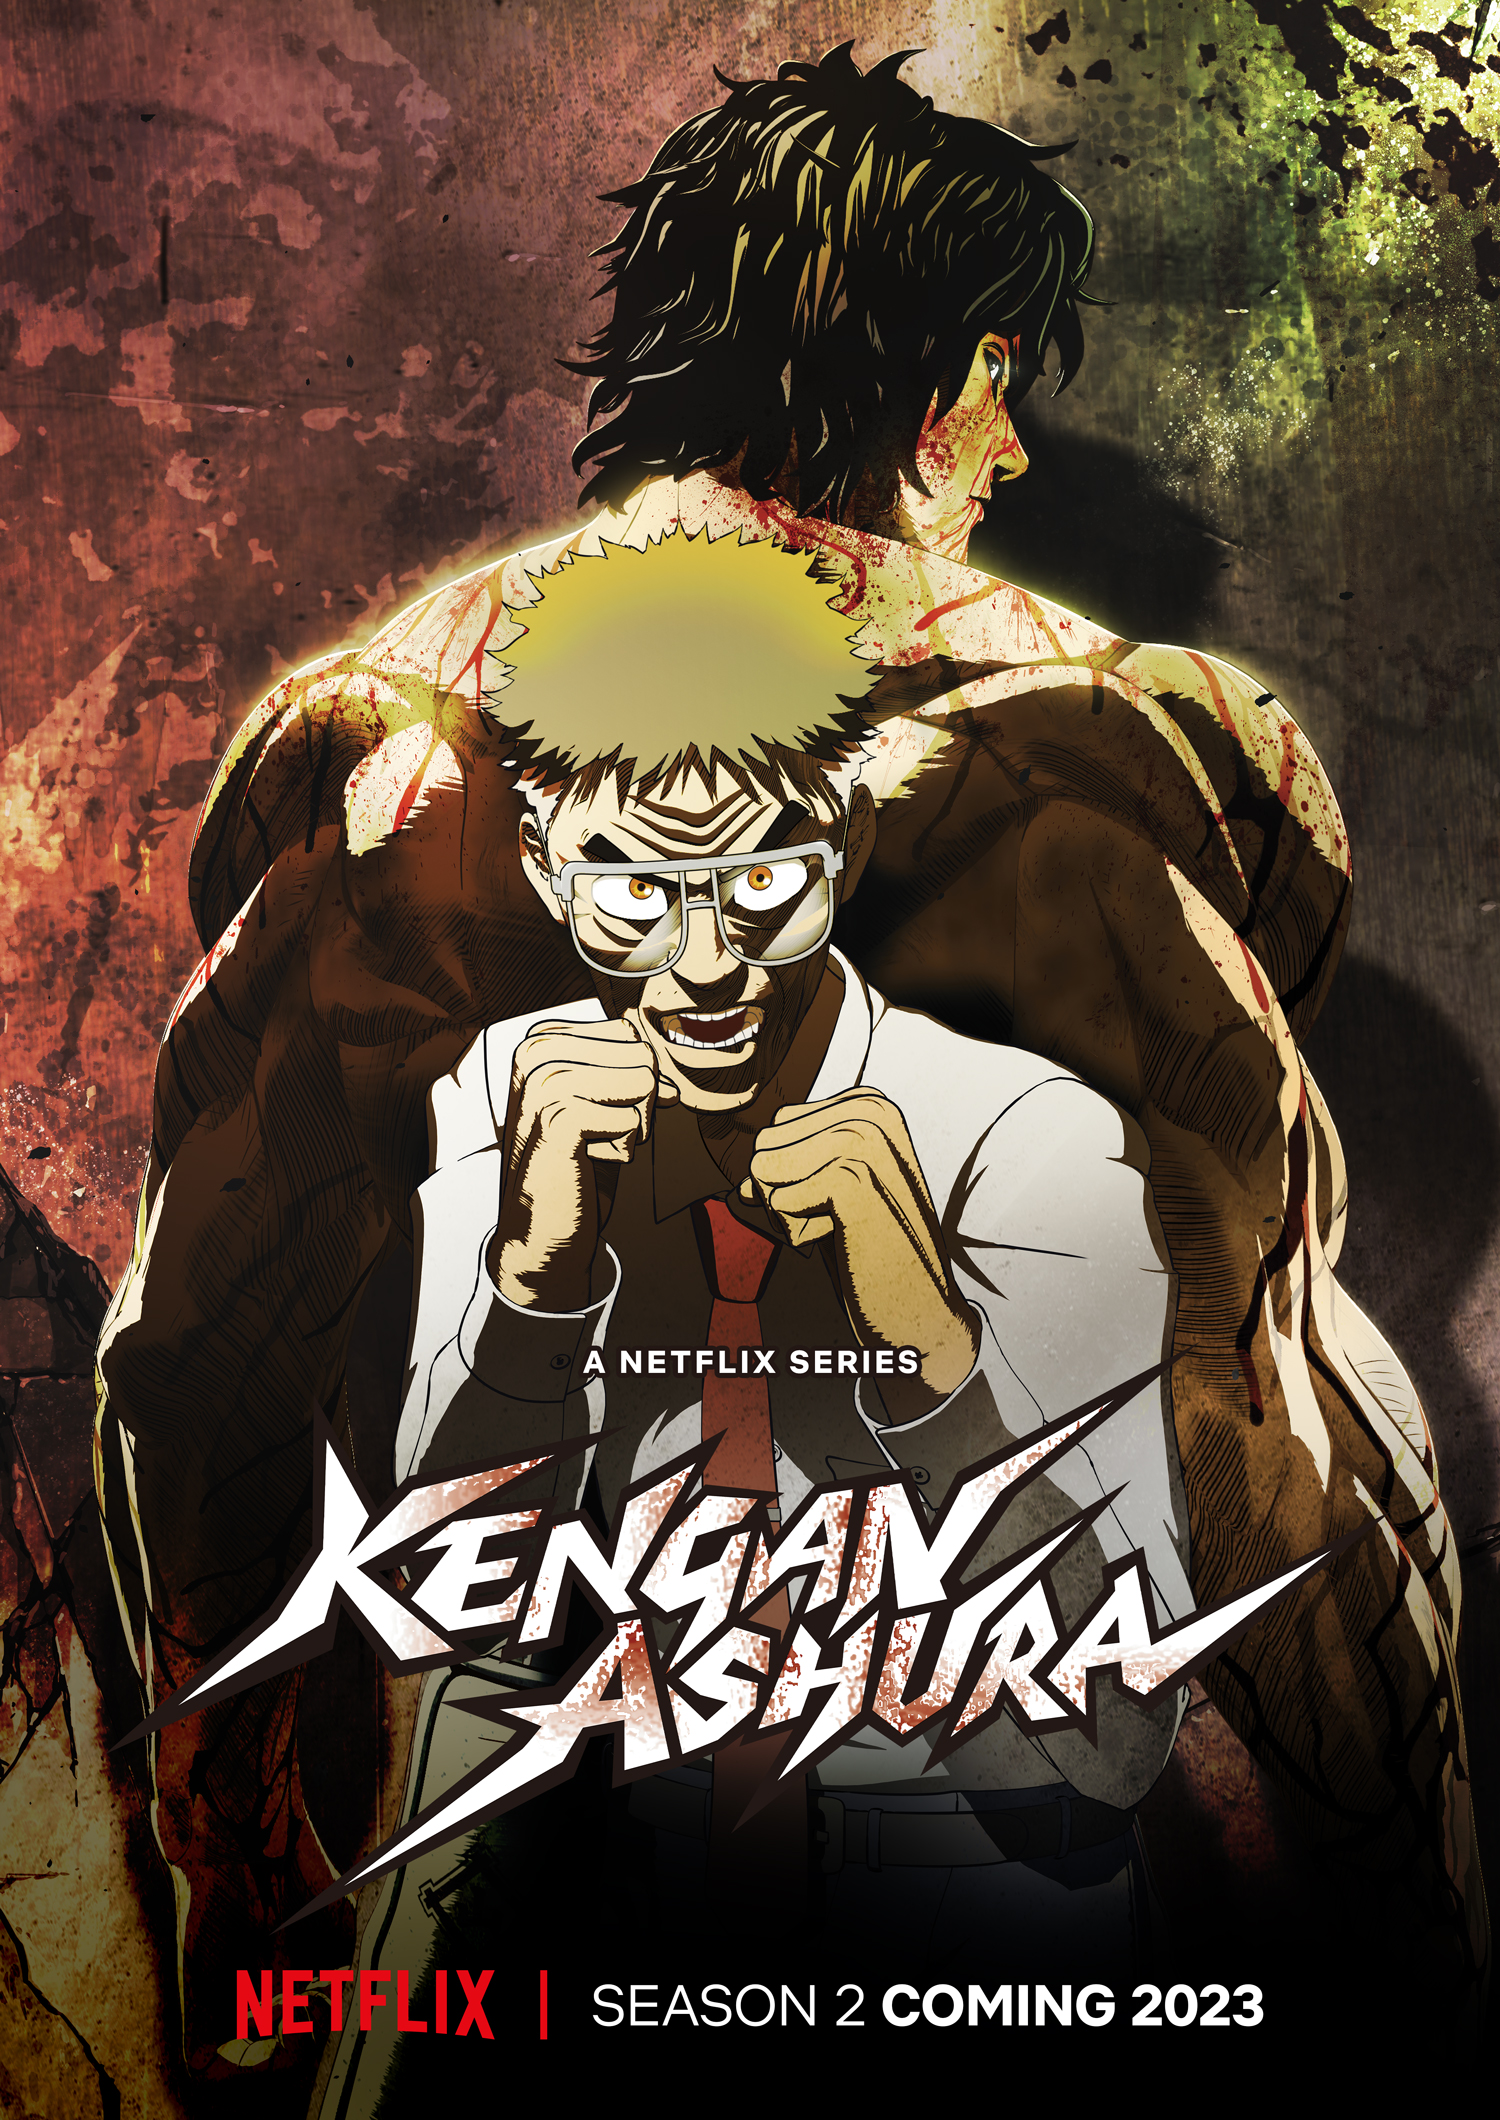 Likes. the moment we've been waiting for...Kengan Ashura Season 2 is c...